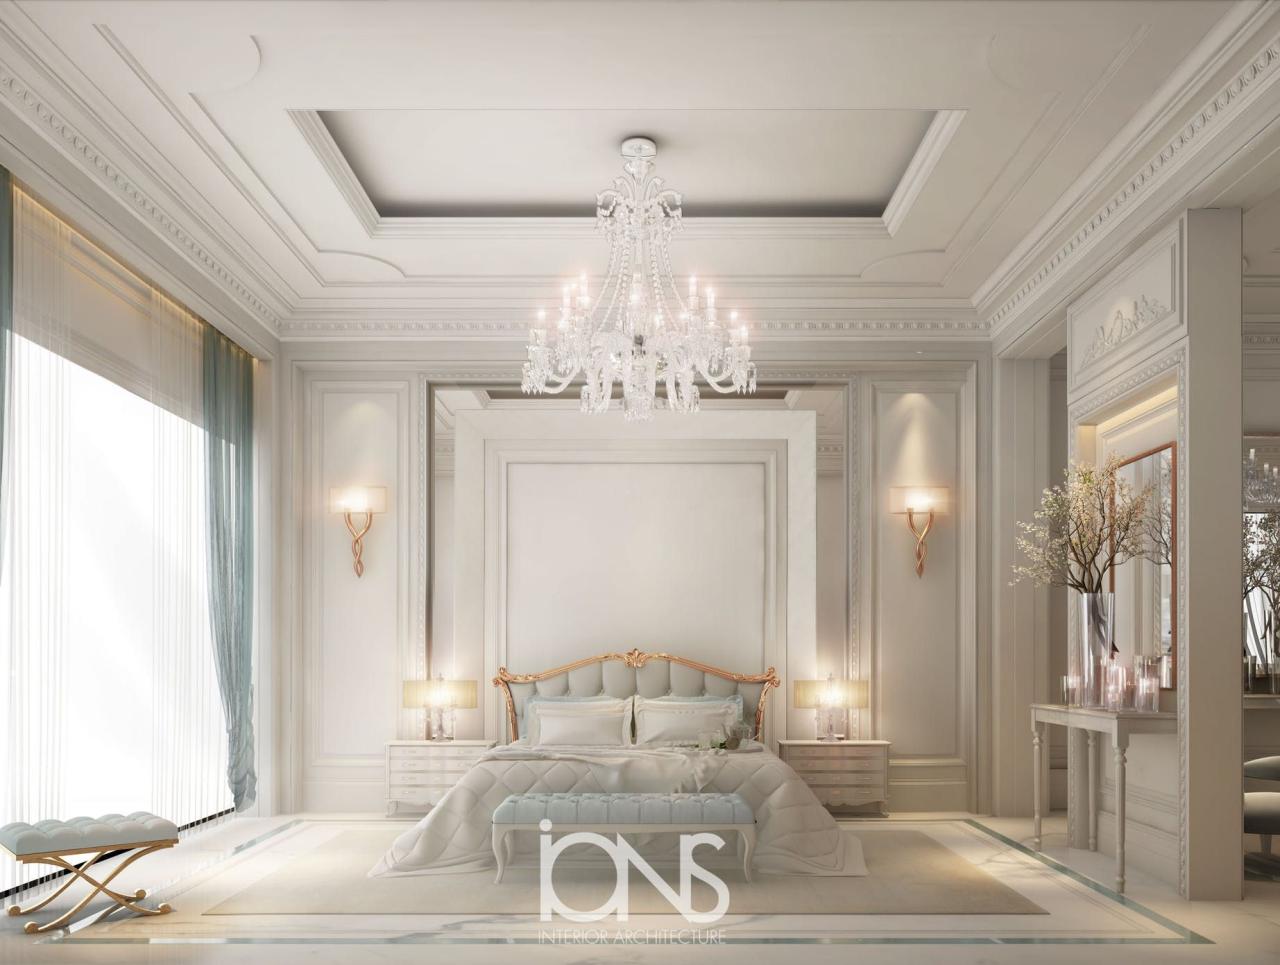 Bedroom classic modern bedrooms behance interior style contemporary saudi bed house luxury arabia luxurious apartments master part hotel perfect decor